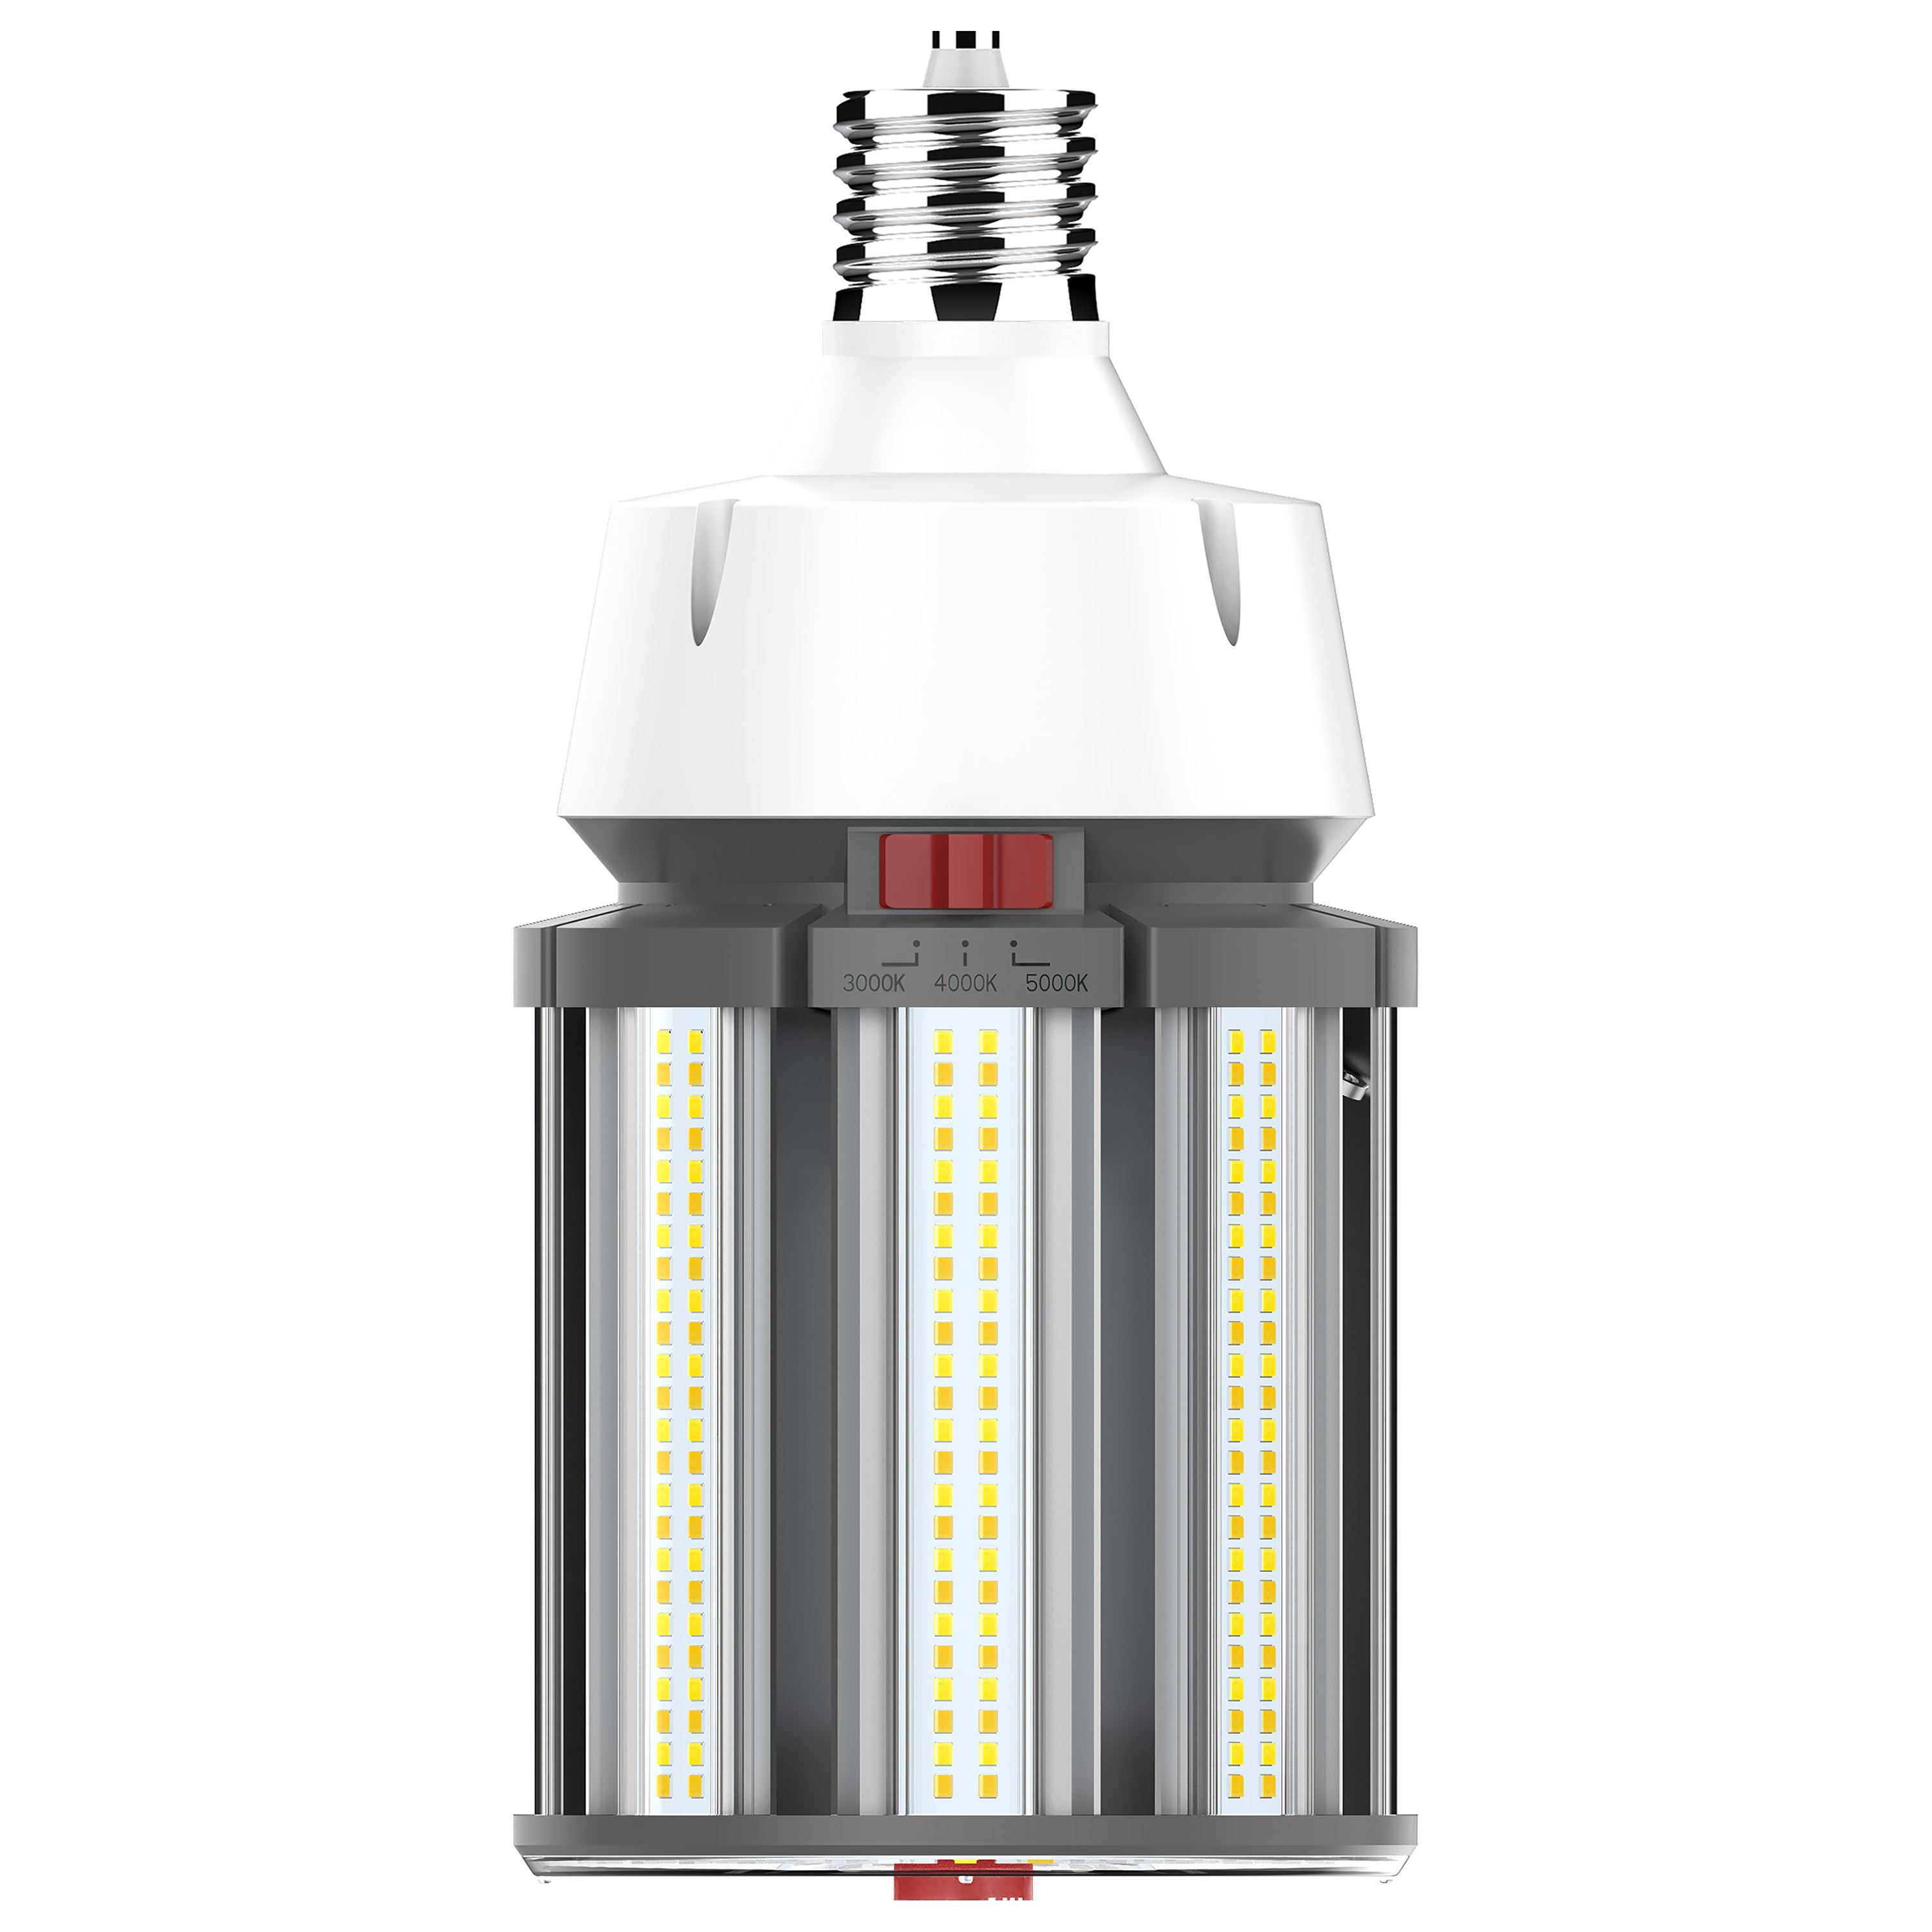 SAT S23144 100/80/63 WATTAGE SELECTABLE LED (400W/320W/250W HID REPLACEMENT) 30K/40K/50K CCT SELECTABLE TYPE B BALLAST BYPASS MOGUL EXTENDED BASE 100-277V